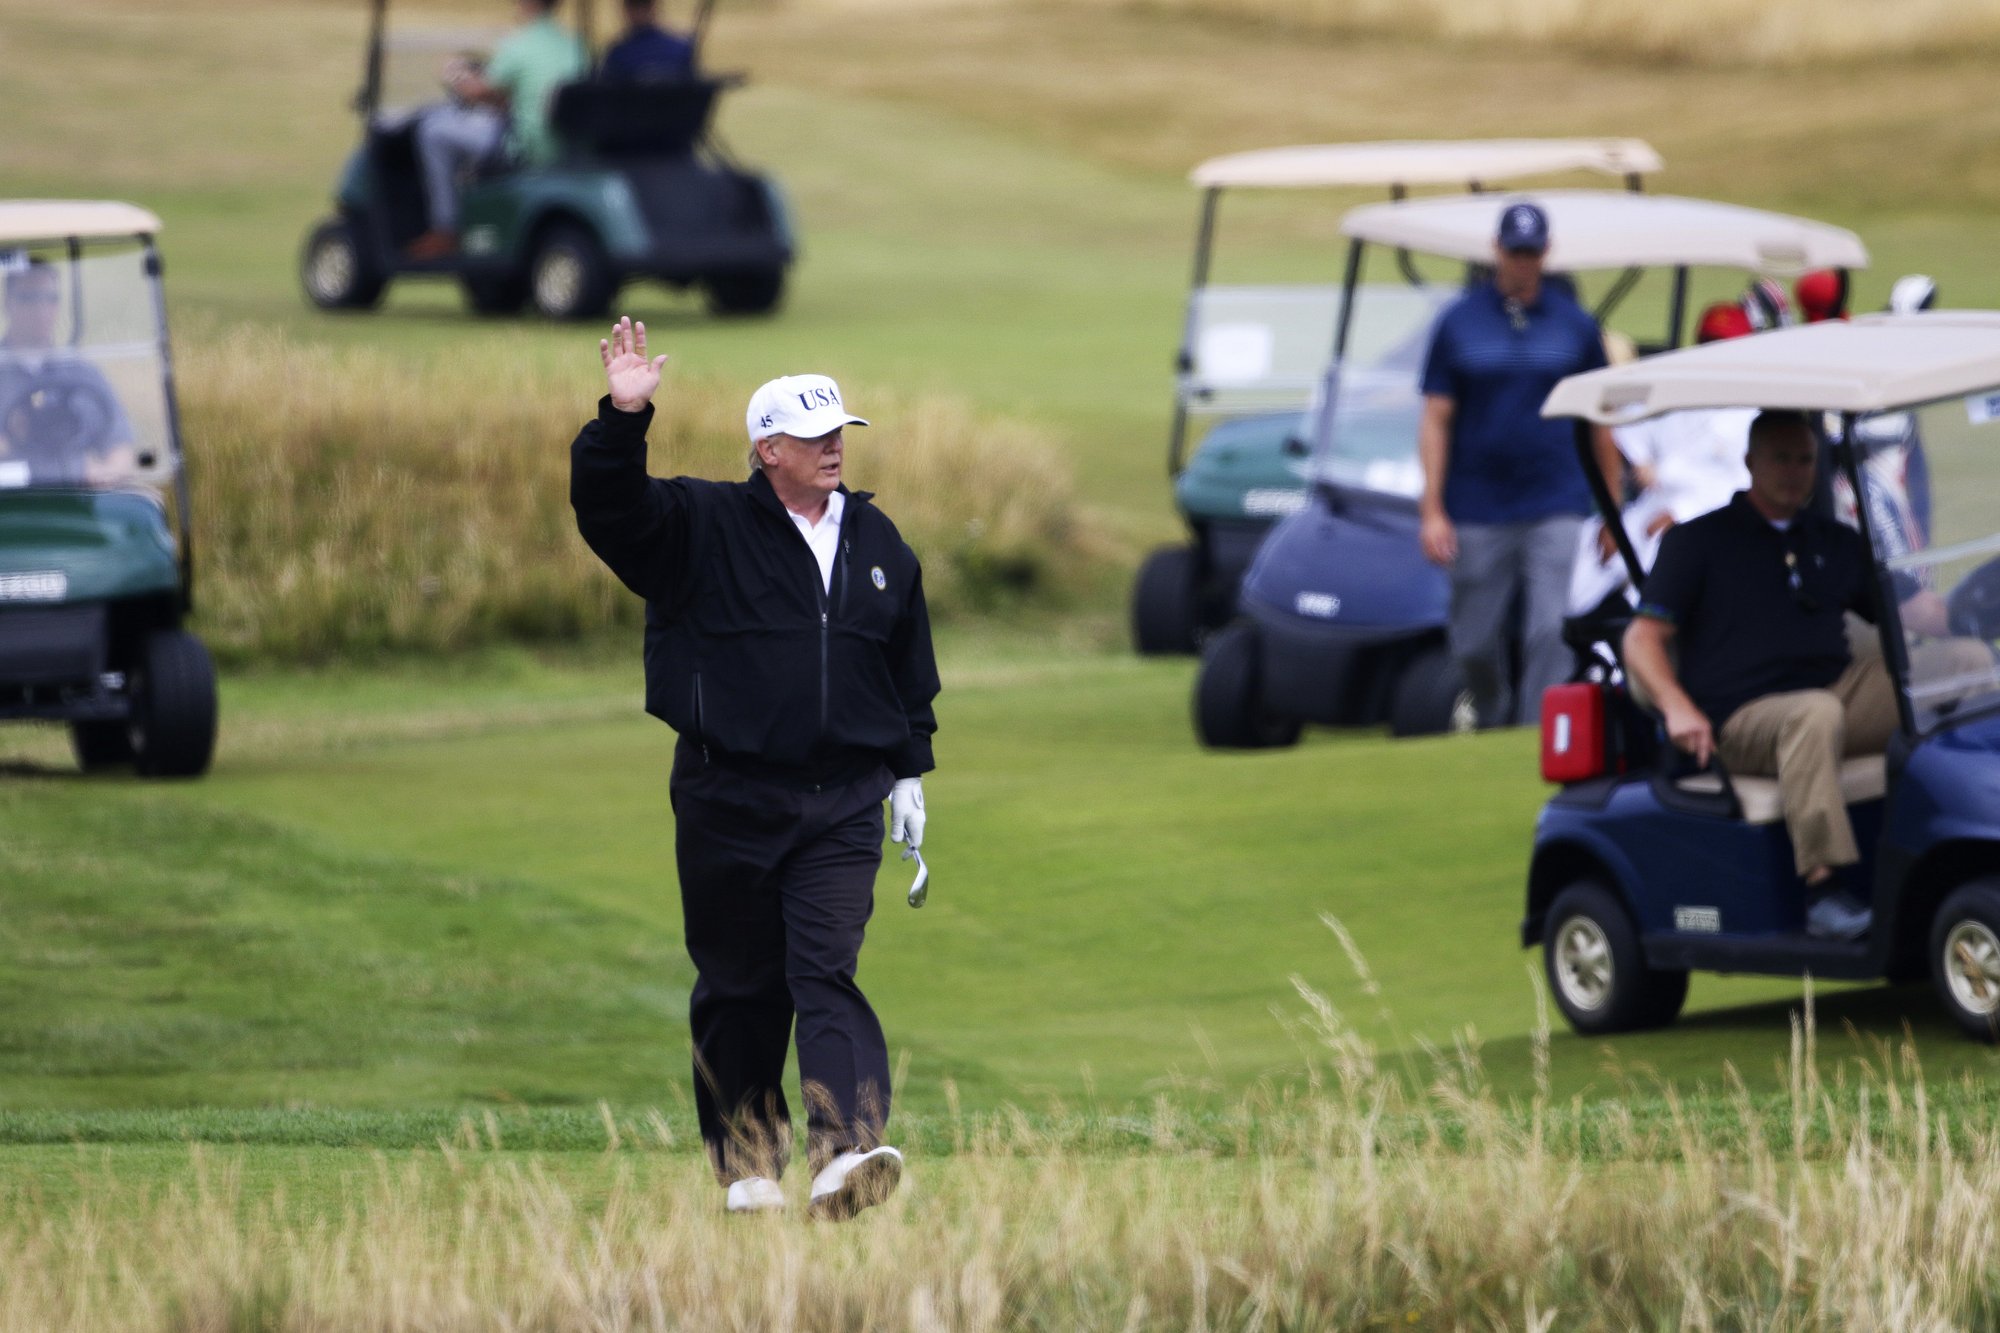 Author talks about President Trump’s golf game and cheating